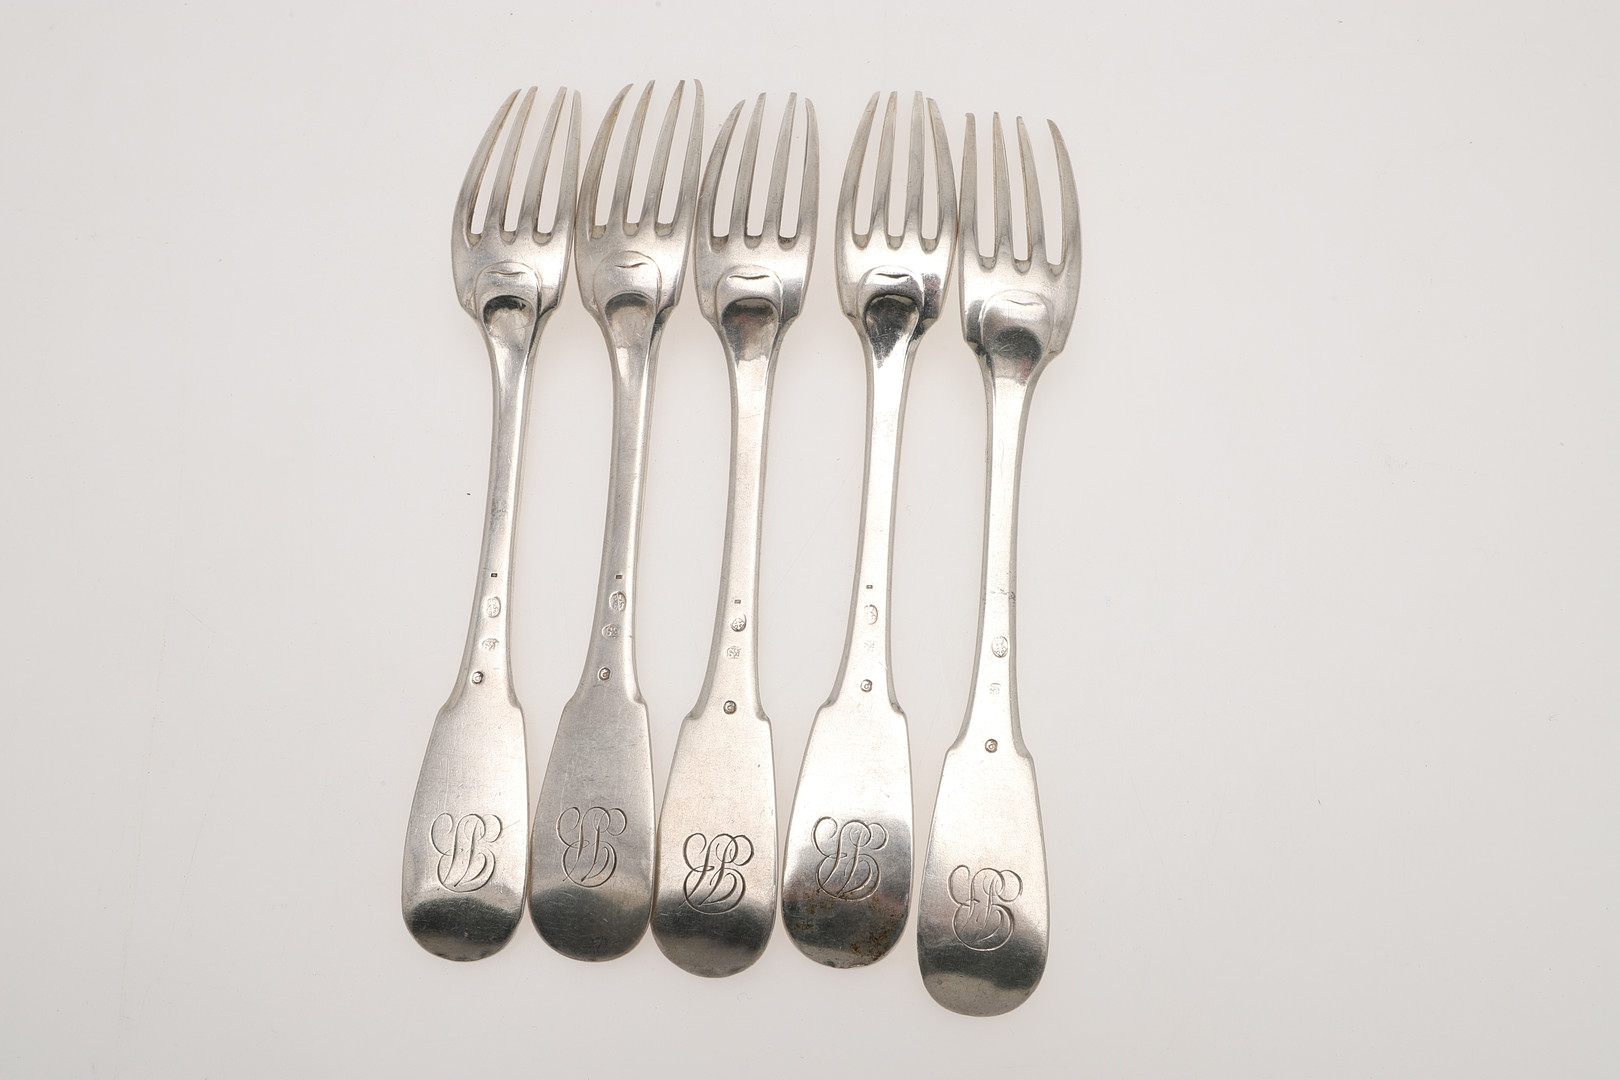 LATE 18TH/ EARLY 19TH CENTURY ITALIAN SILVER FLATWARE. - Image 14 of 15